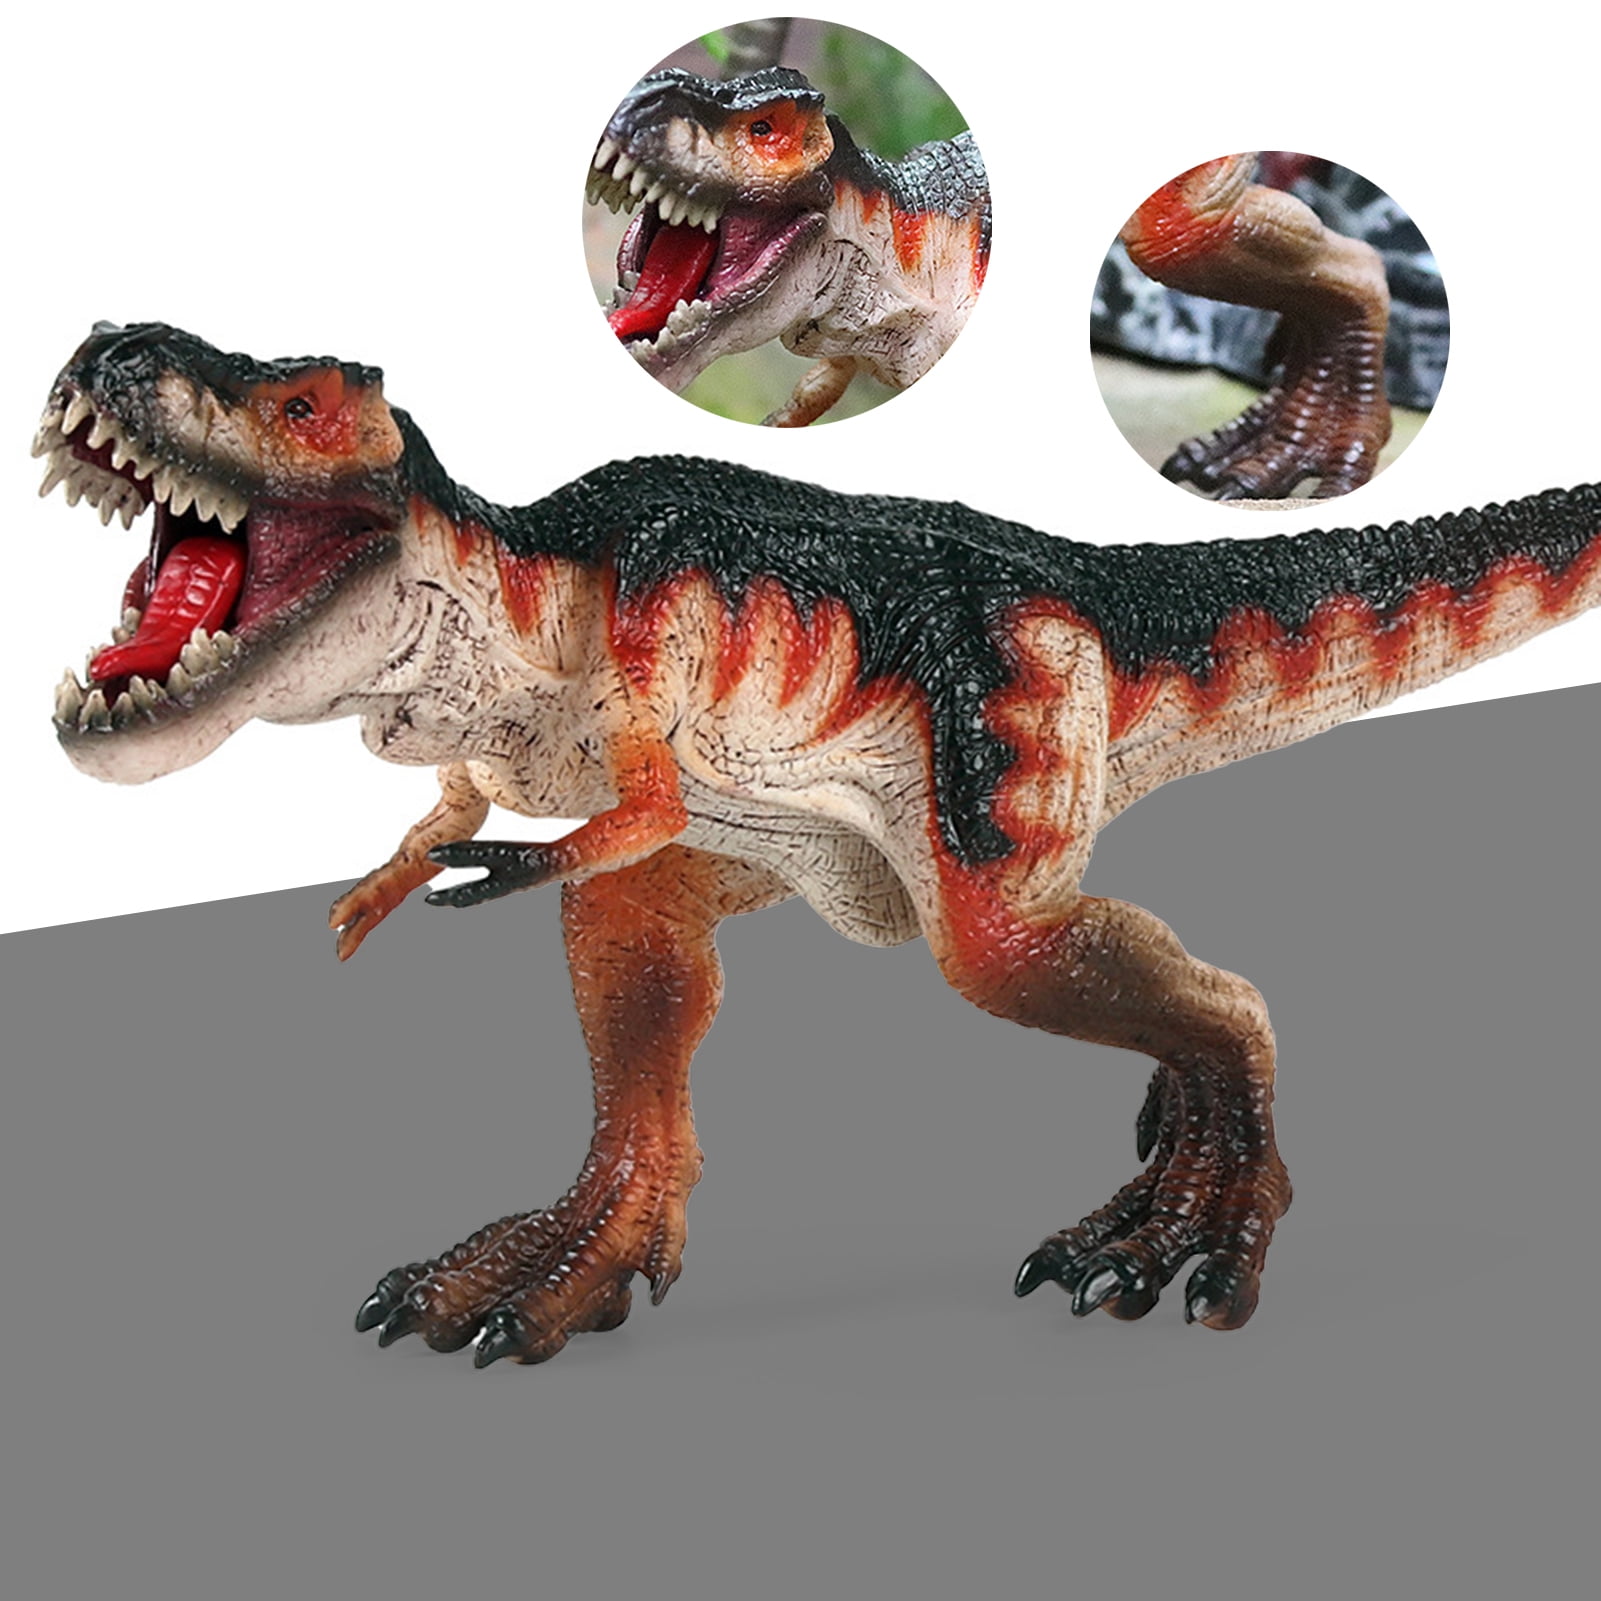 Scotty Tyrannosaurus Dinosaur Model - Enhance Cognitive Ability and Early  Education, Smell-less Dinosaur Action Figure for Children 